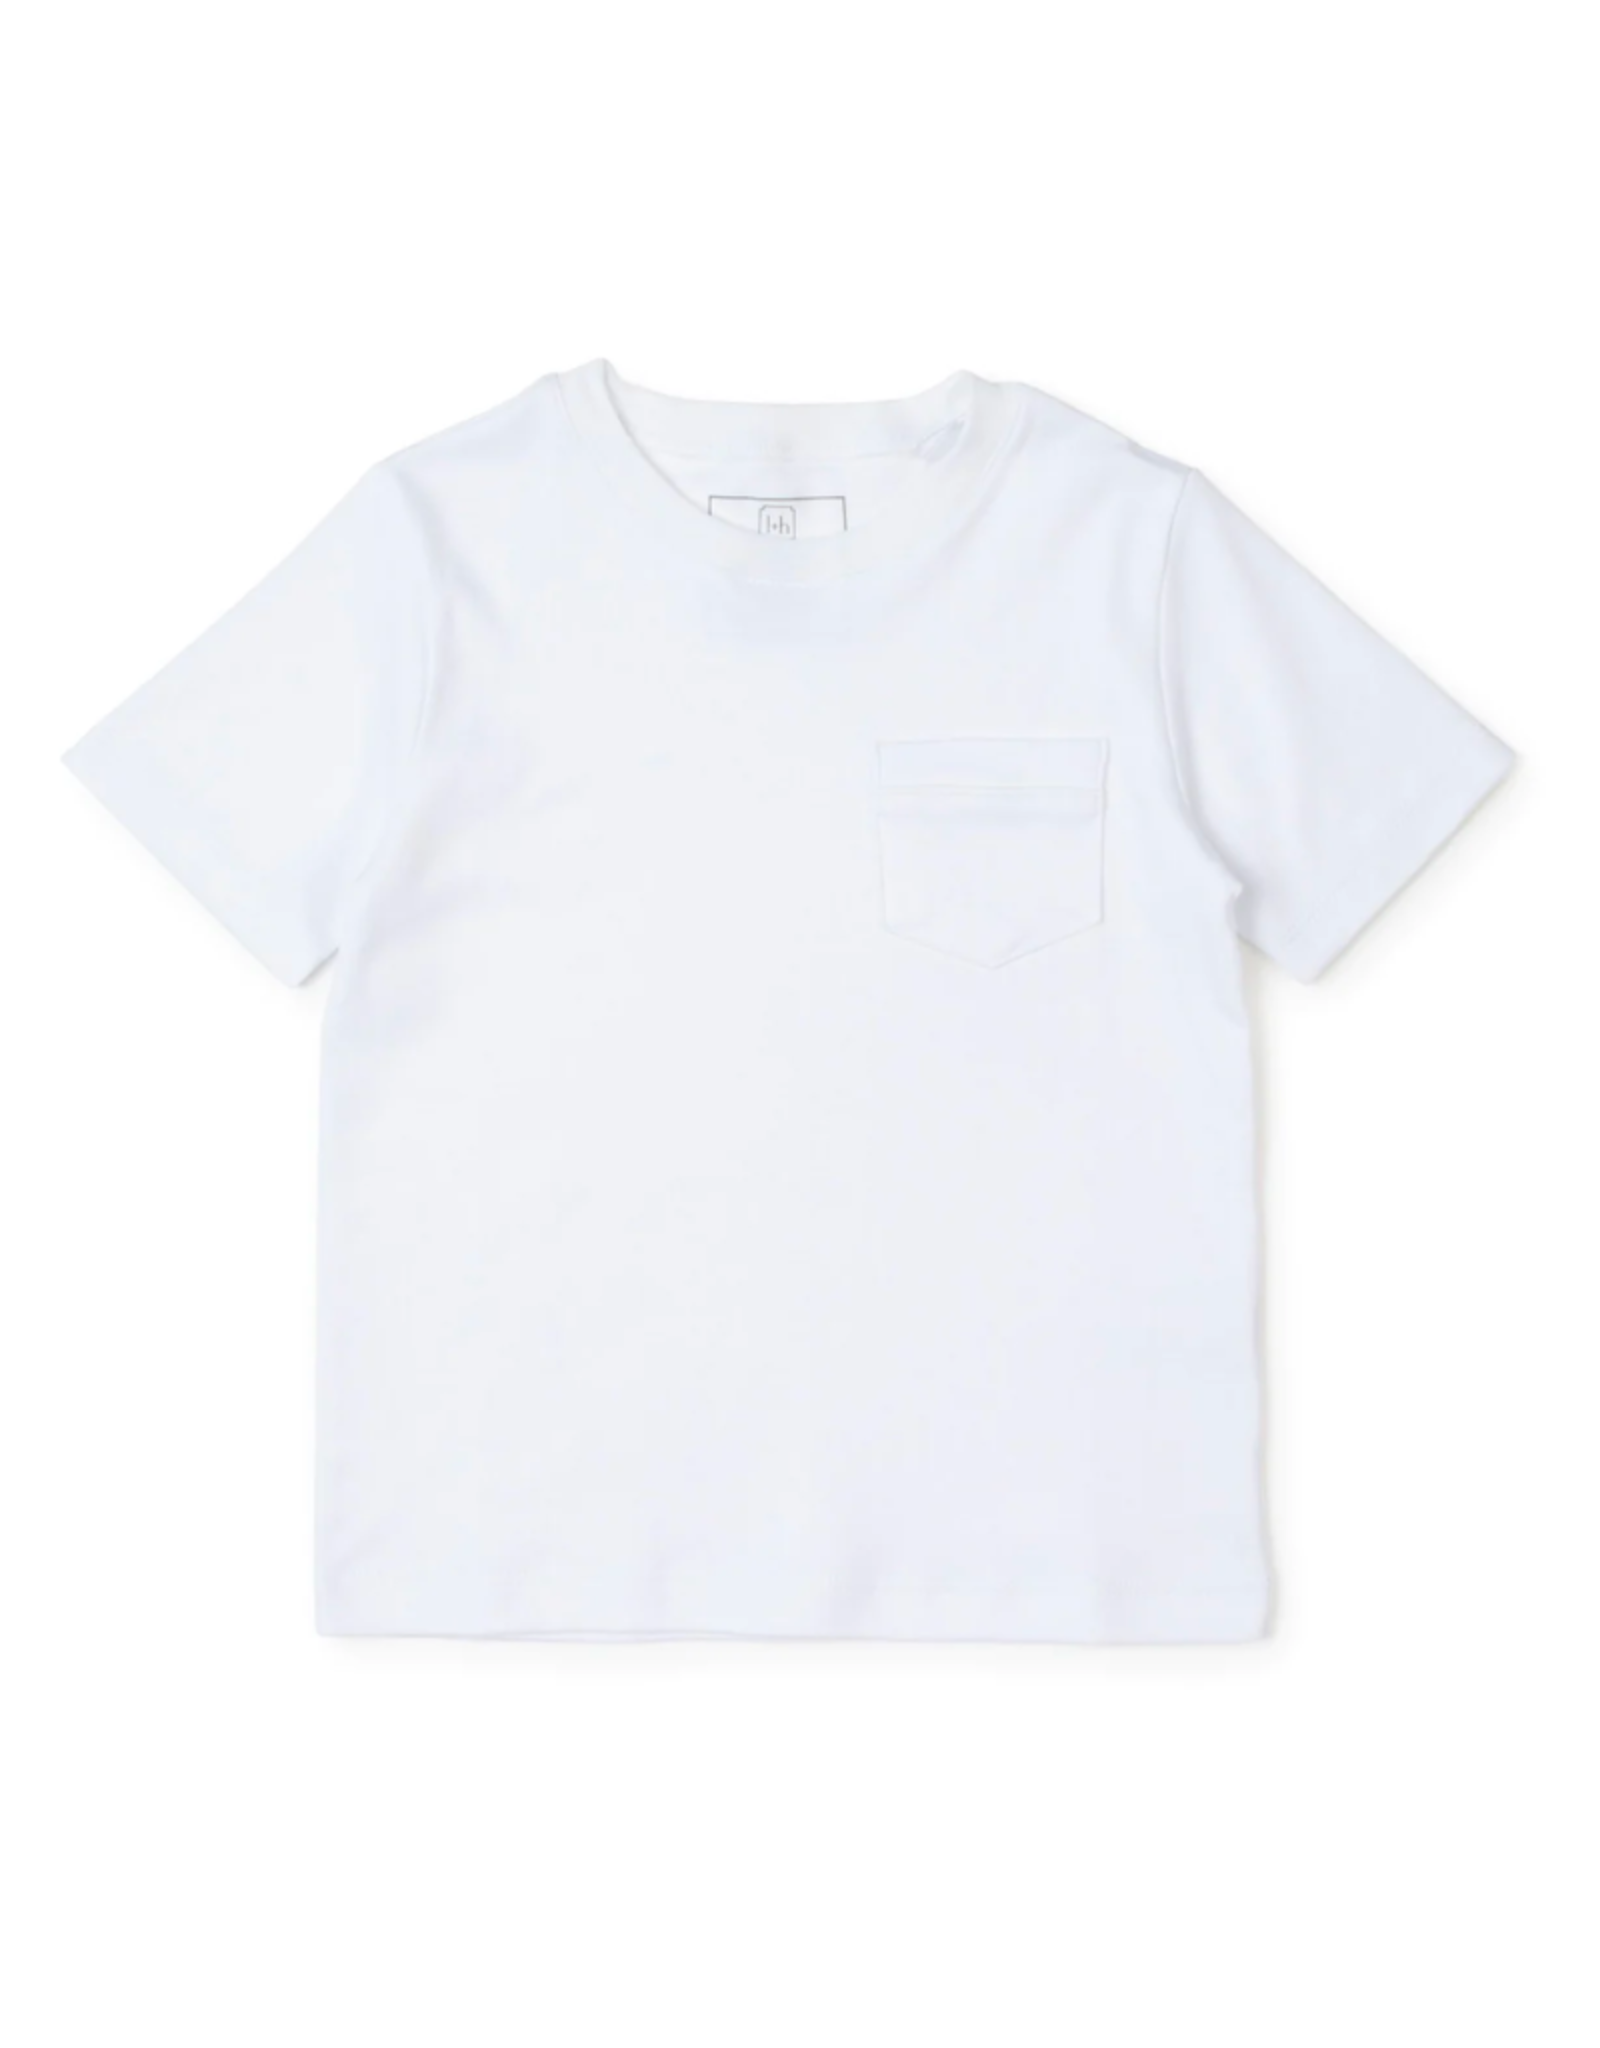 Lila and Hayes Charles Boy's T-shirt White